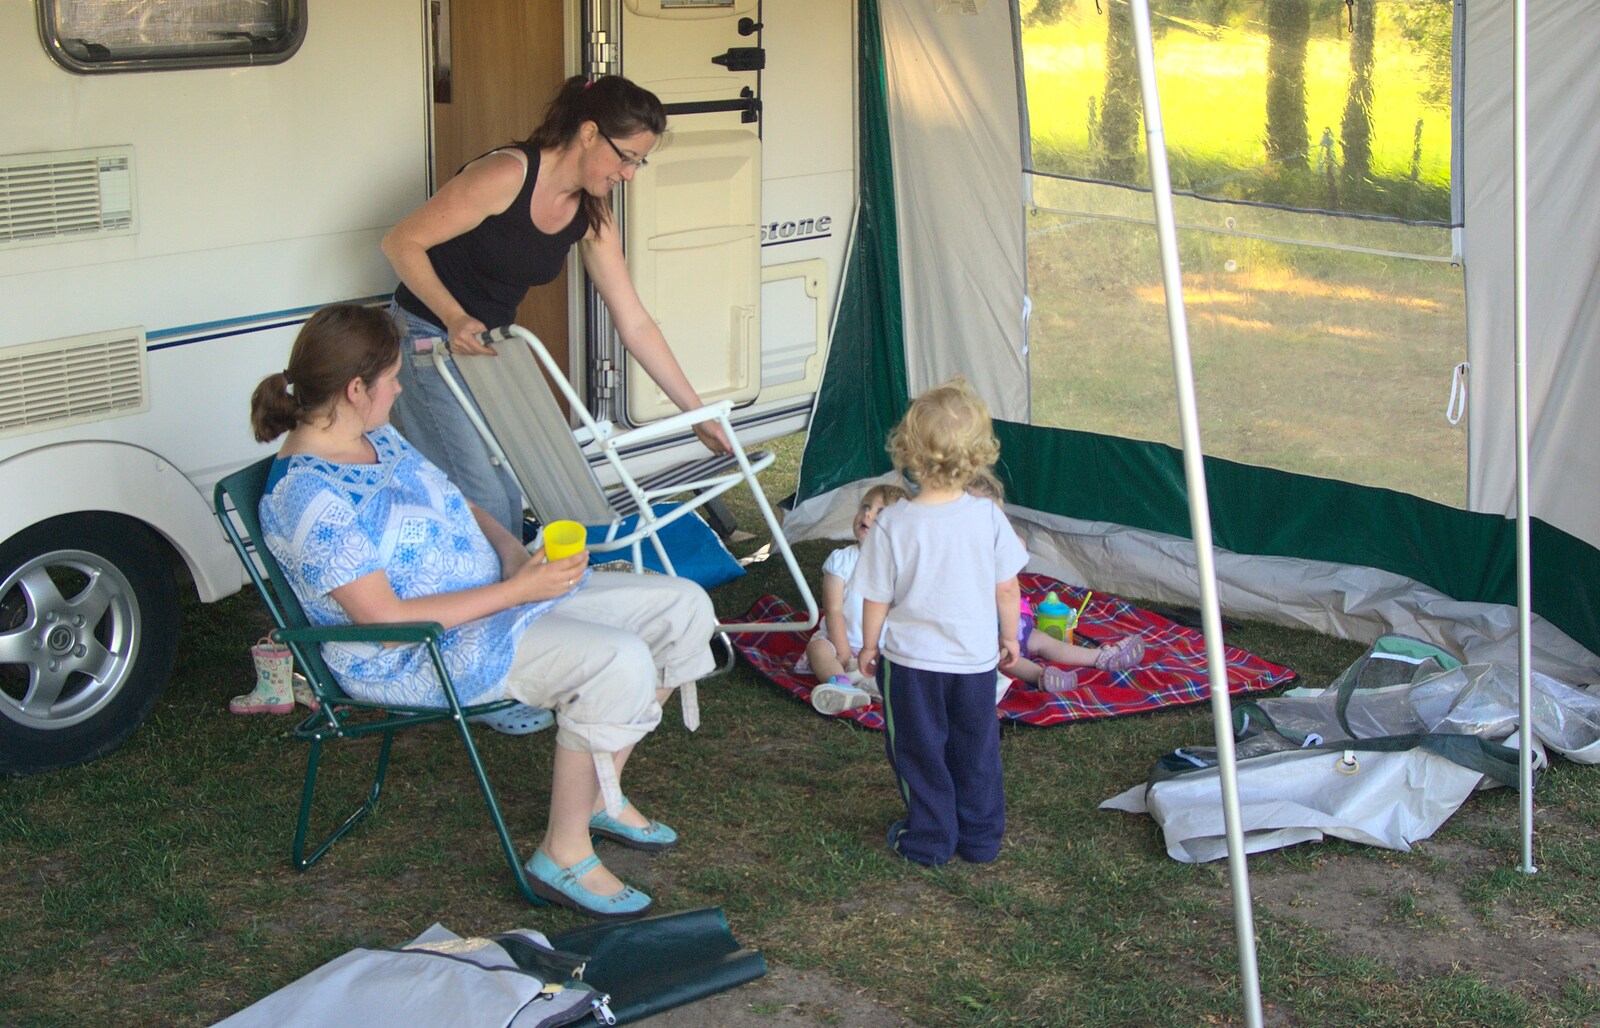 We visit Suzanne's awning from Carlton Park Camping, Saxmundham, Suffolk - 4th June 2011